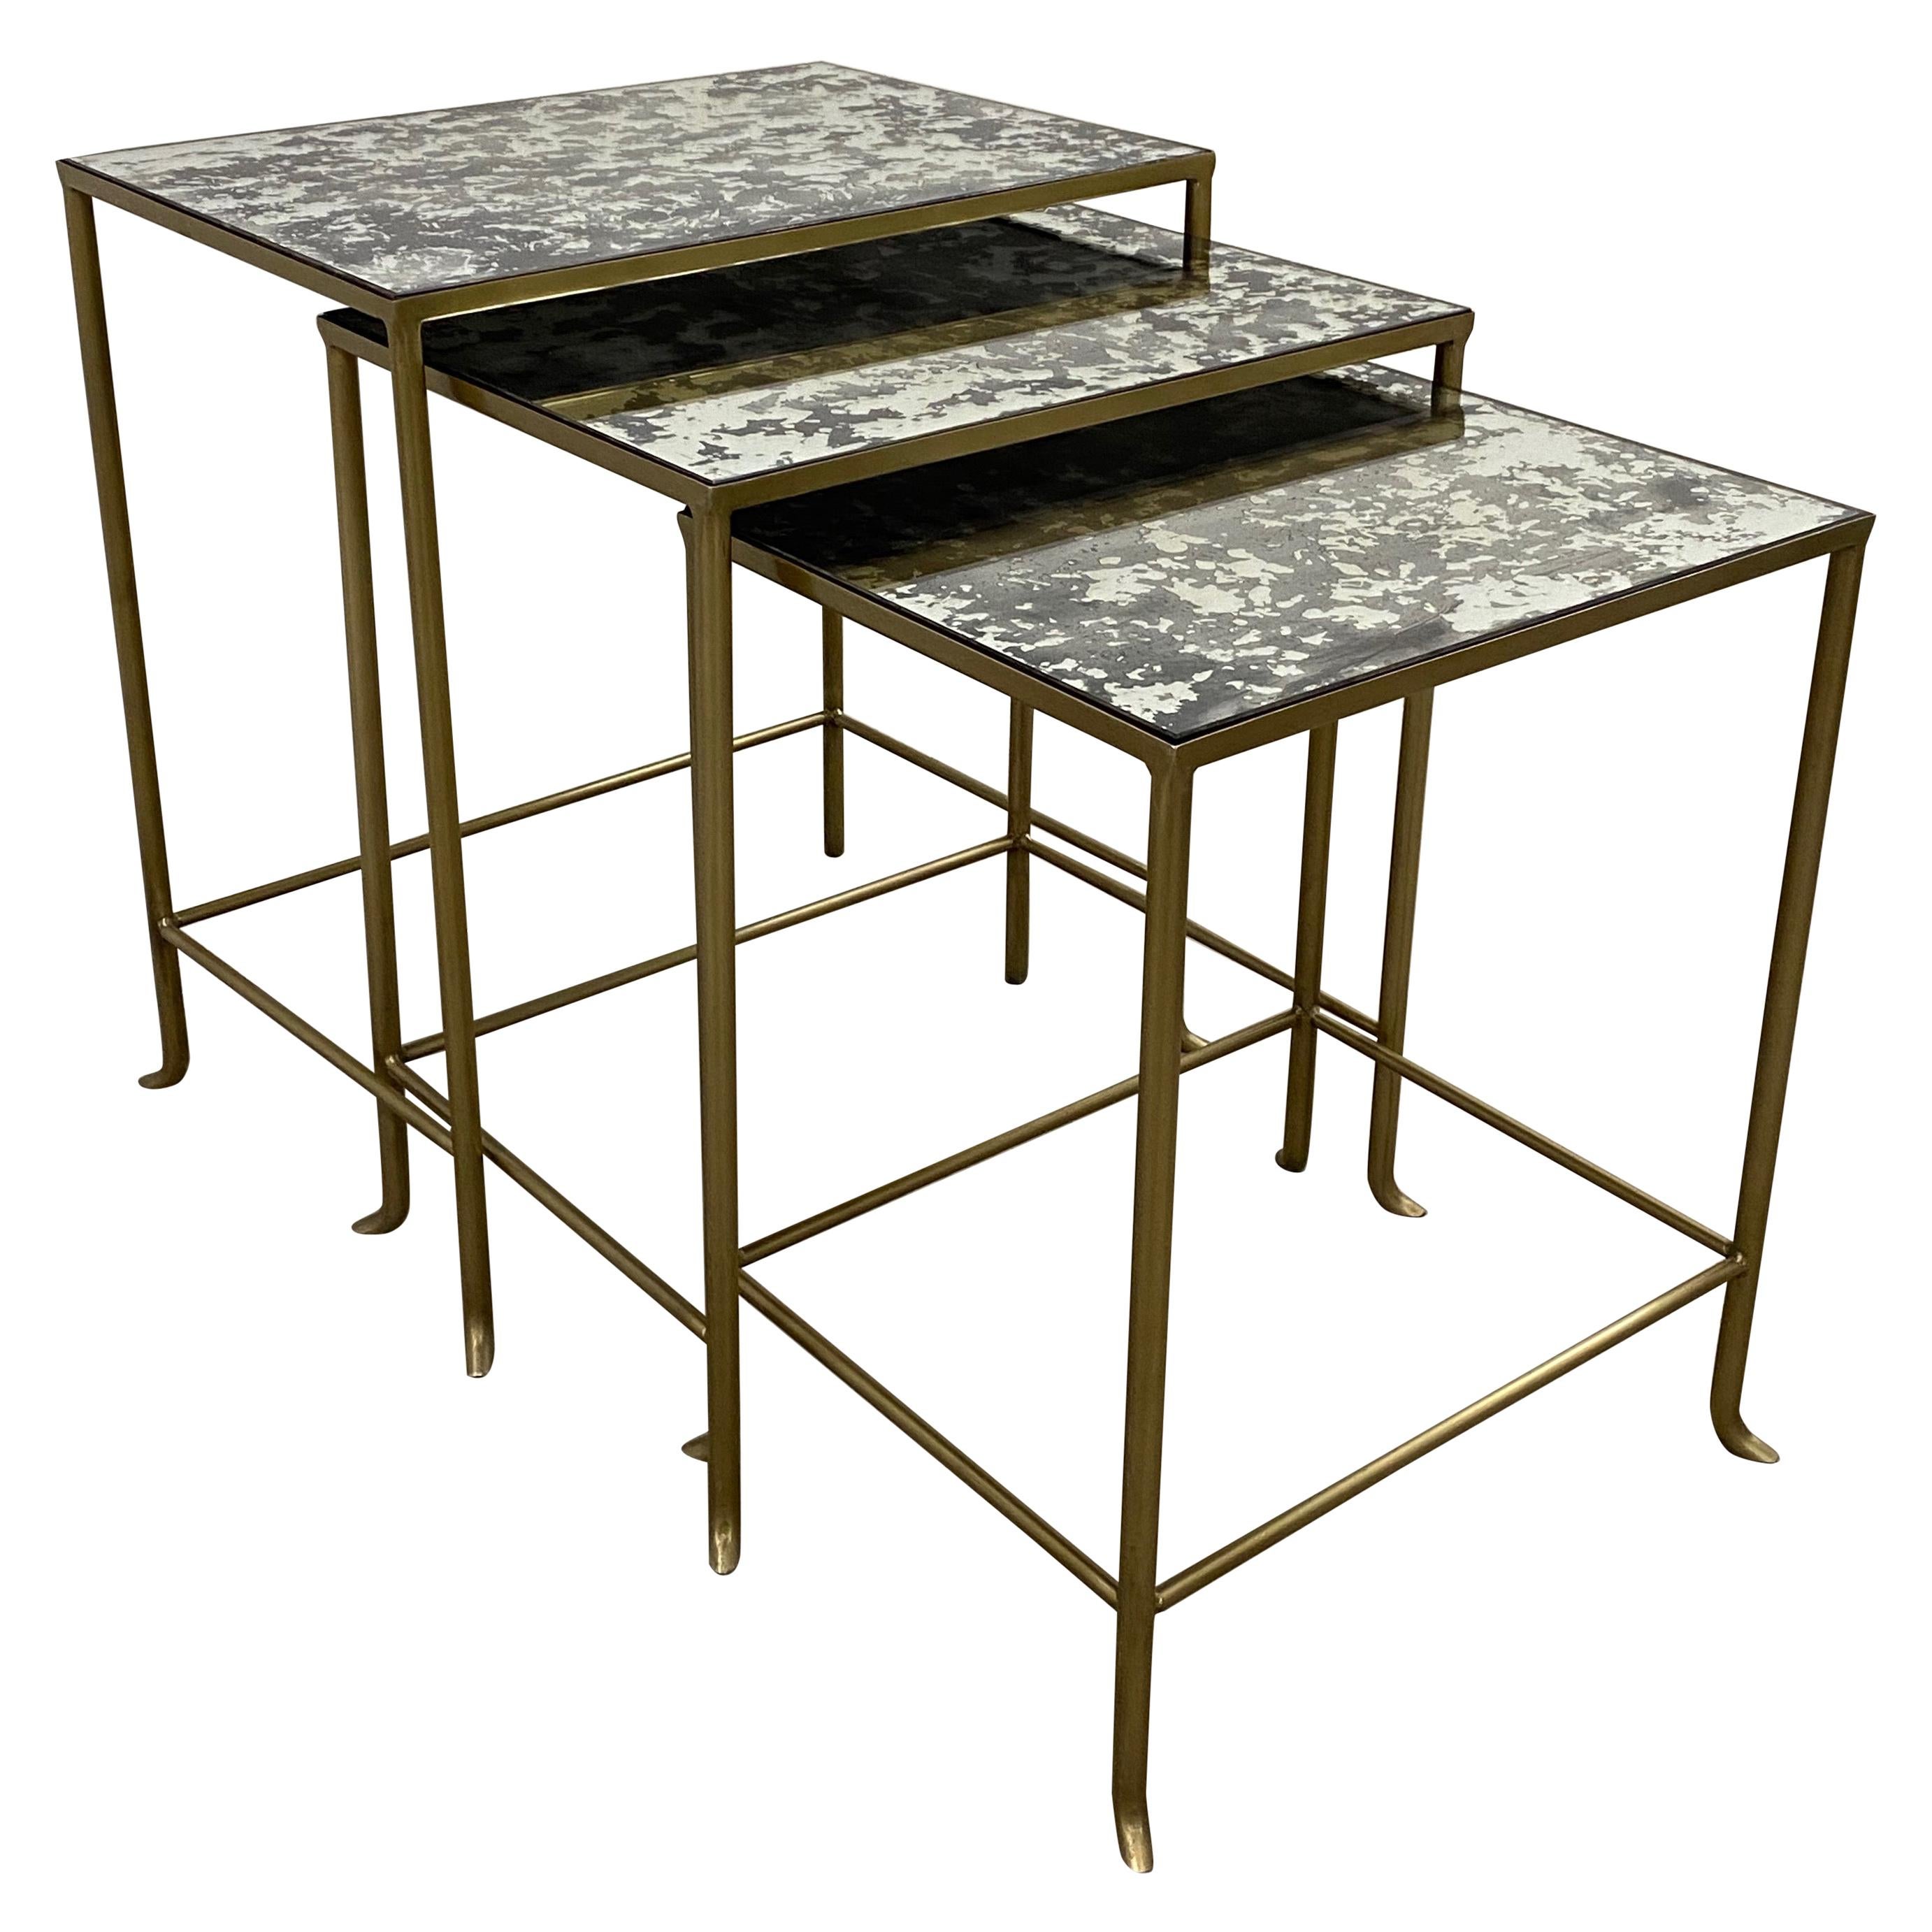 Set of Three Contemporary Brass Plate Steel and Flecked Mirror Nesting Tables